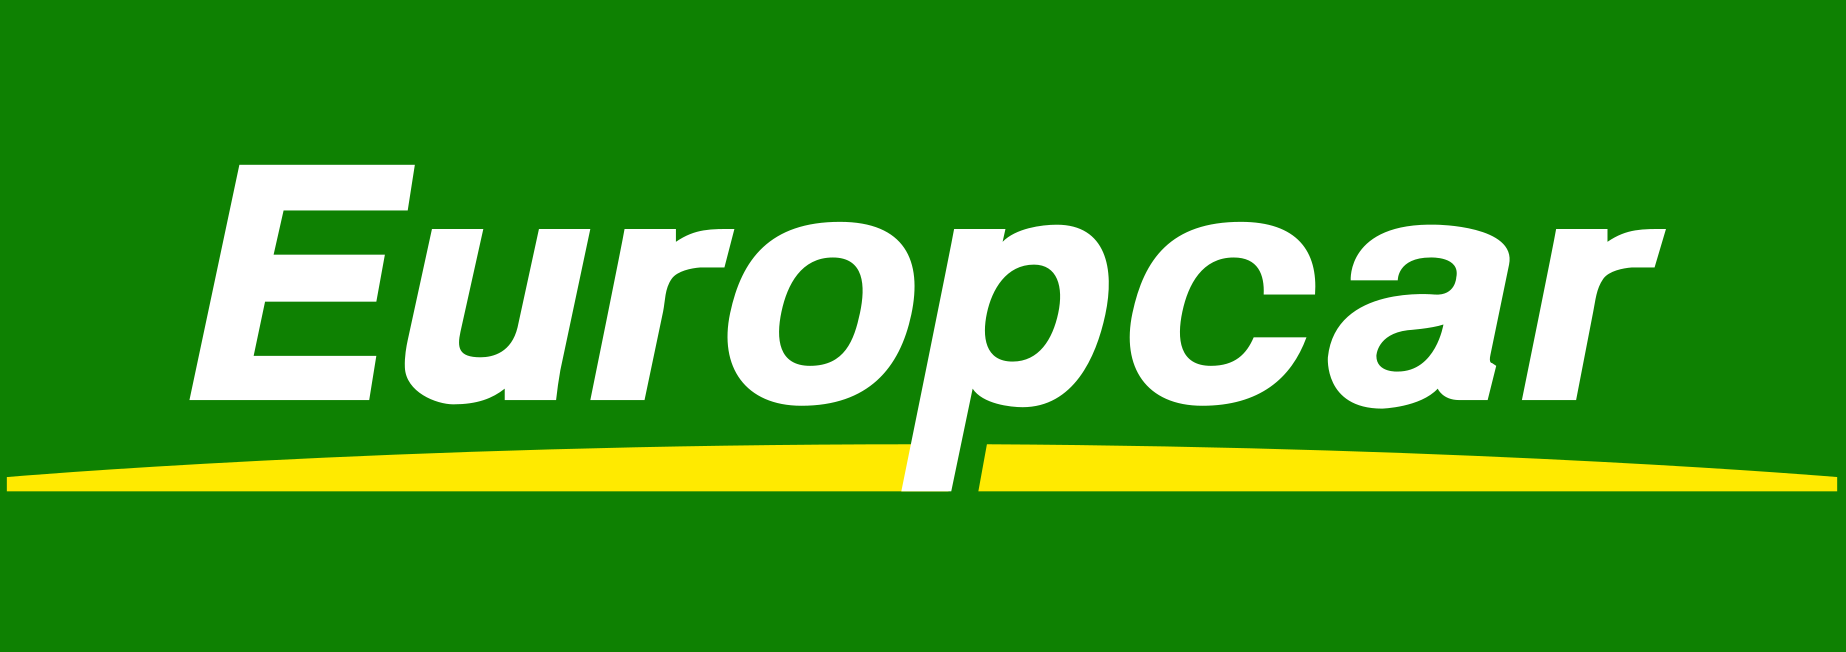 Subscribe To Europcar Newsletter & Get 10% Off Amazing Discounts